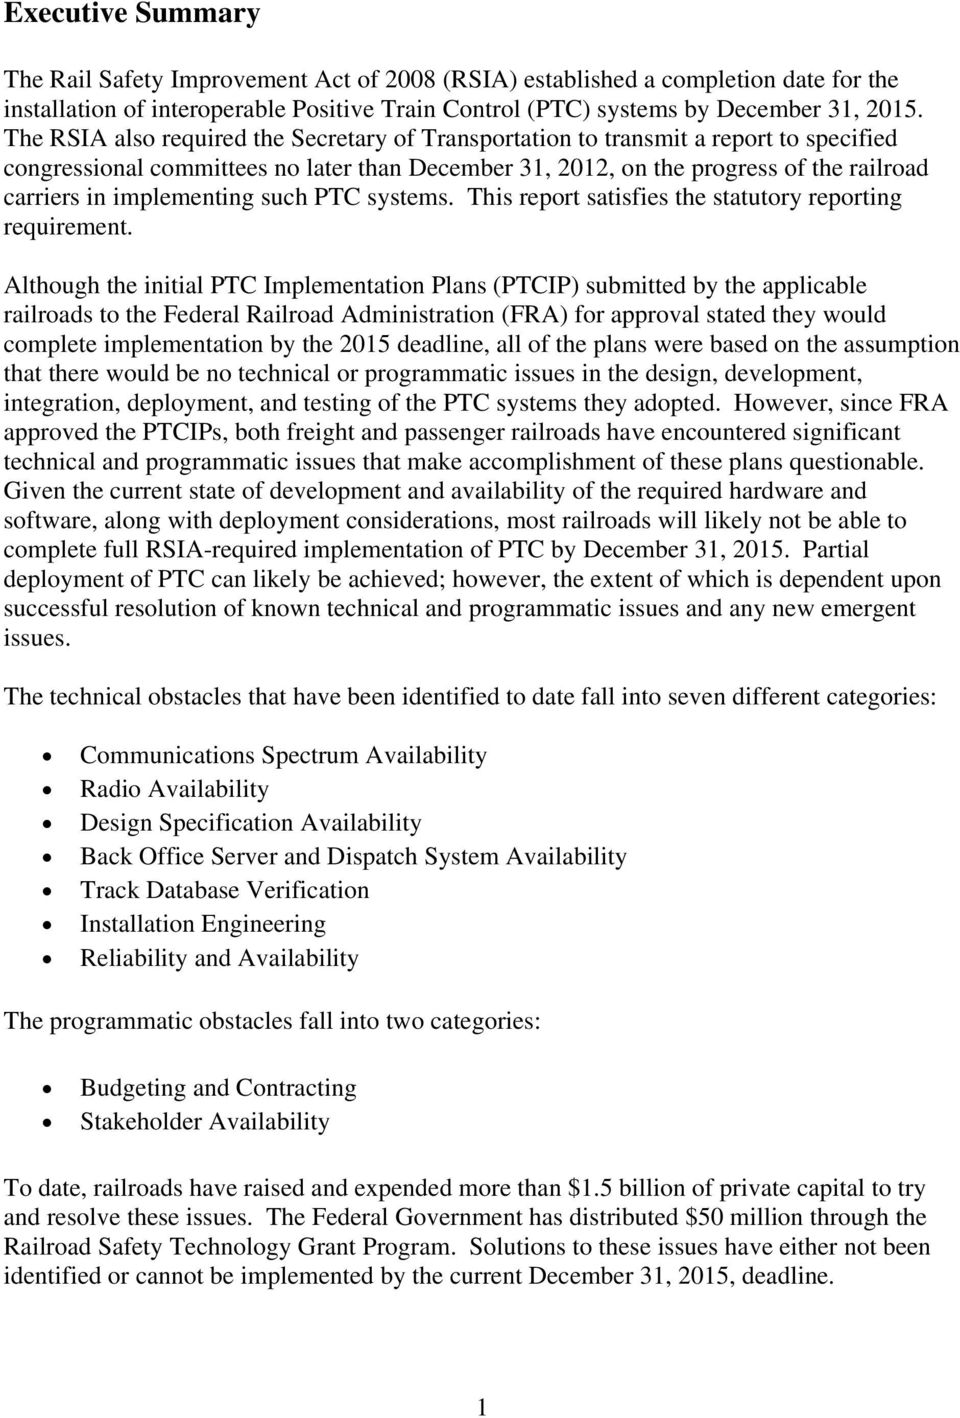 implementing such PTC systems. This report satisfies the statutory reporting requirement.